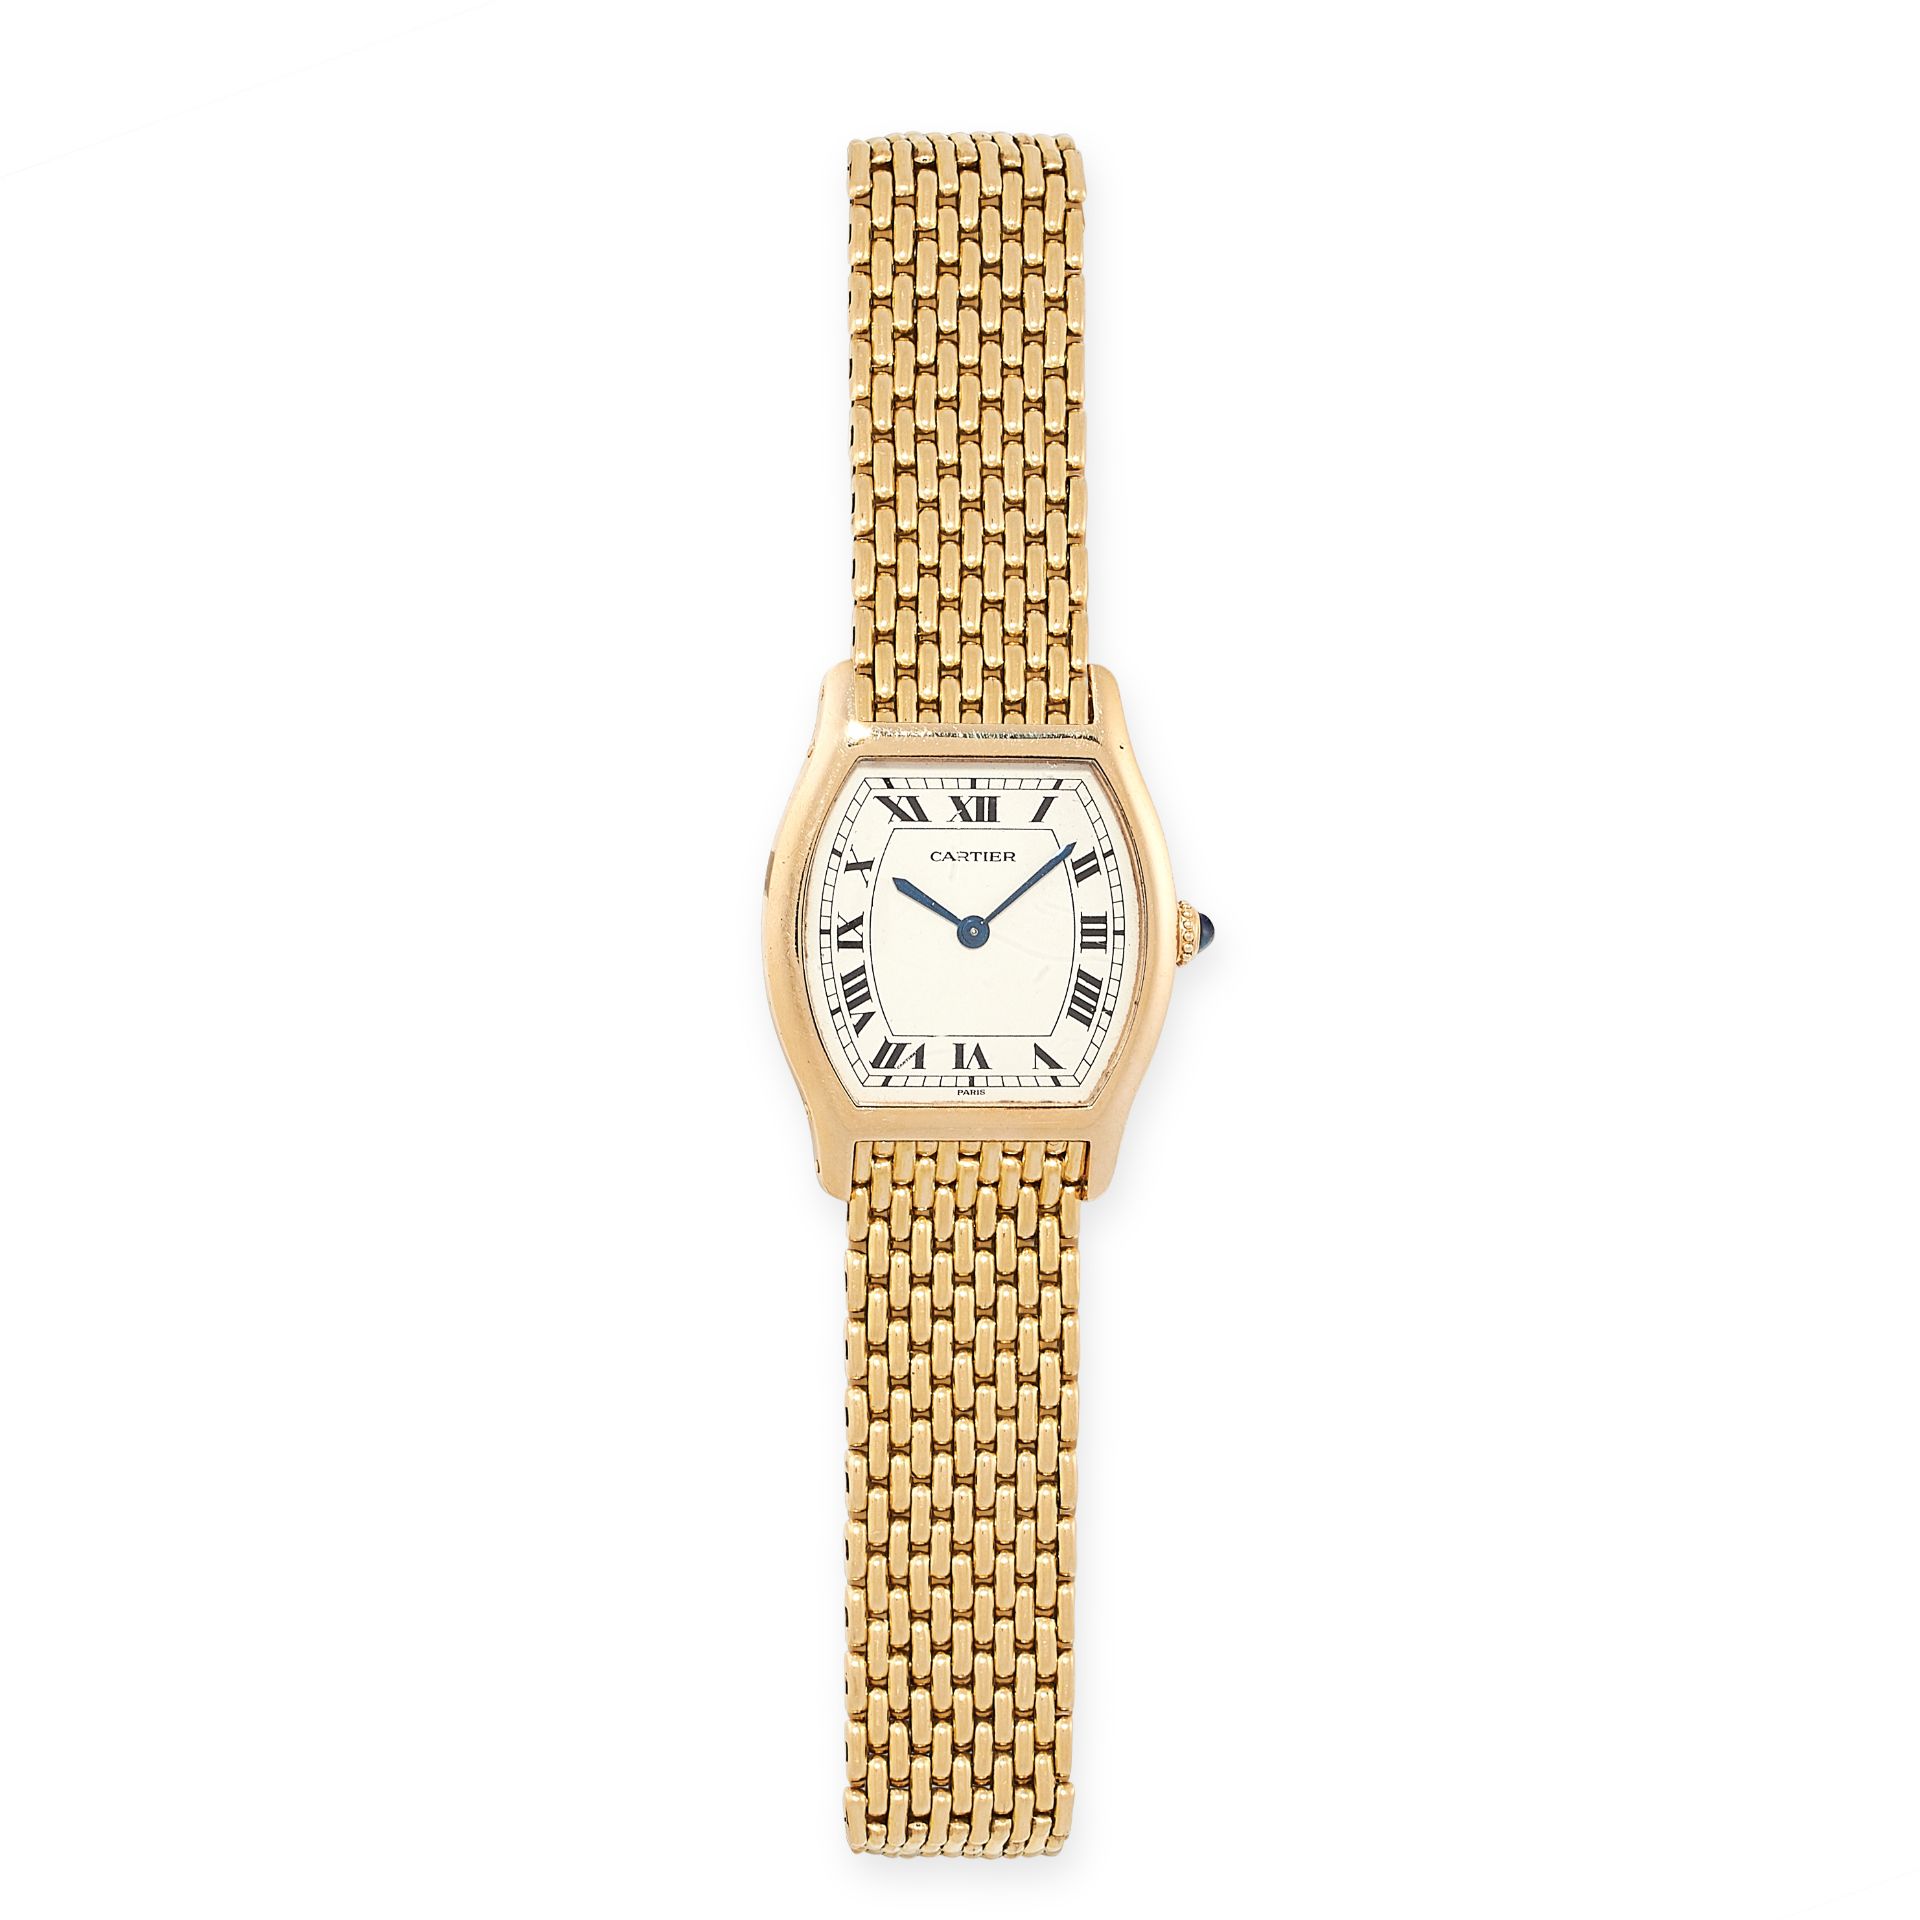 A TORTUE WRIST WATCH, CARTIER in 18ct yellow gold, 26mm case, white dial, Roman numeral hour